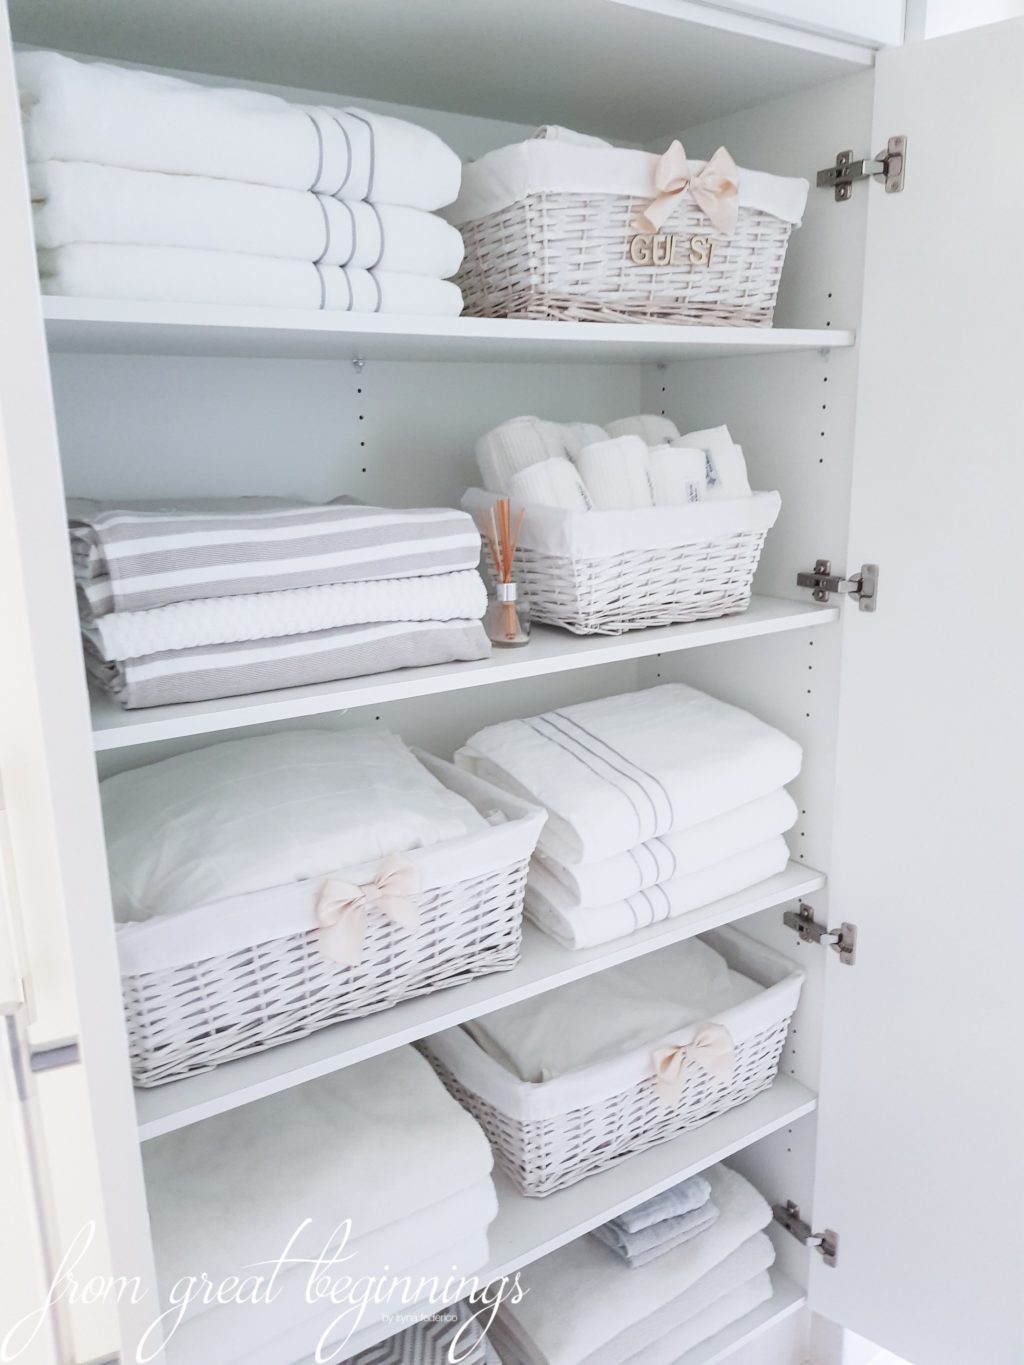 There is something about this linen closet organization project from the blog From Great Beginnings that reminds me like a spa. Grab baskets like the one she uses and put everything up neatly.  